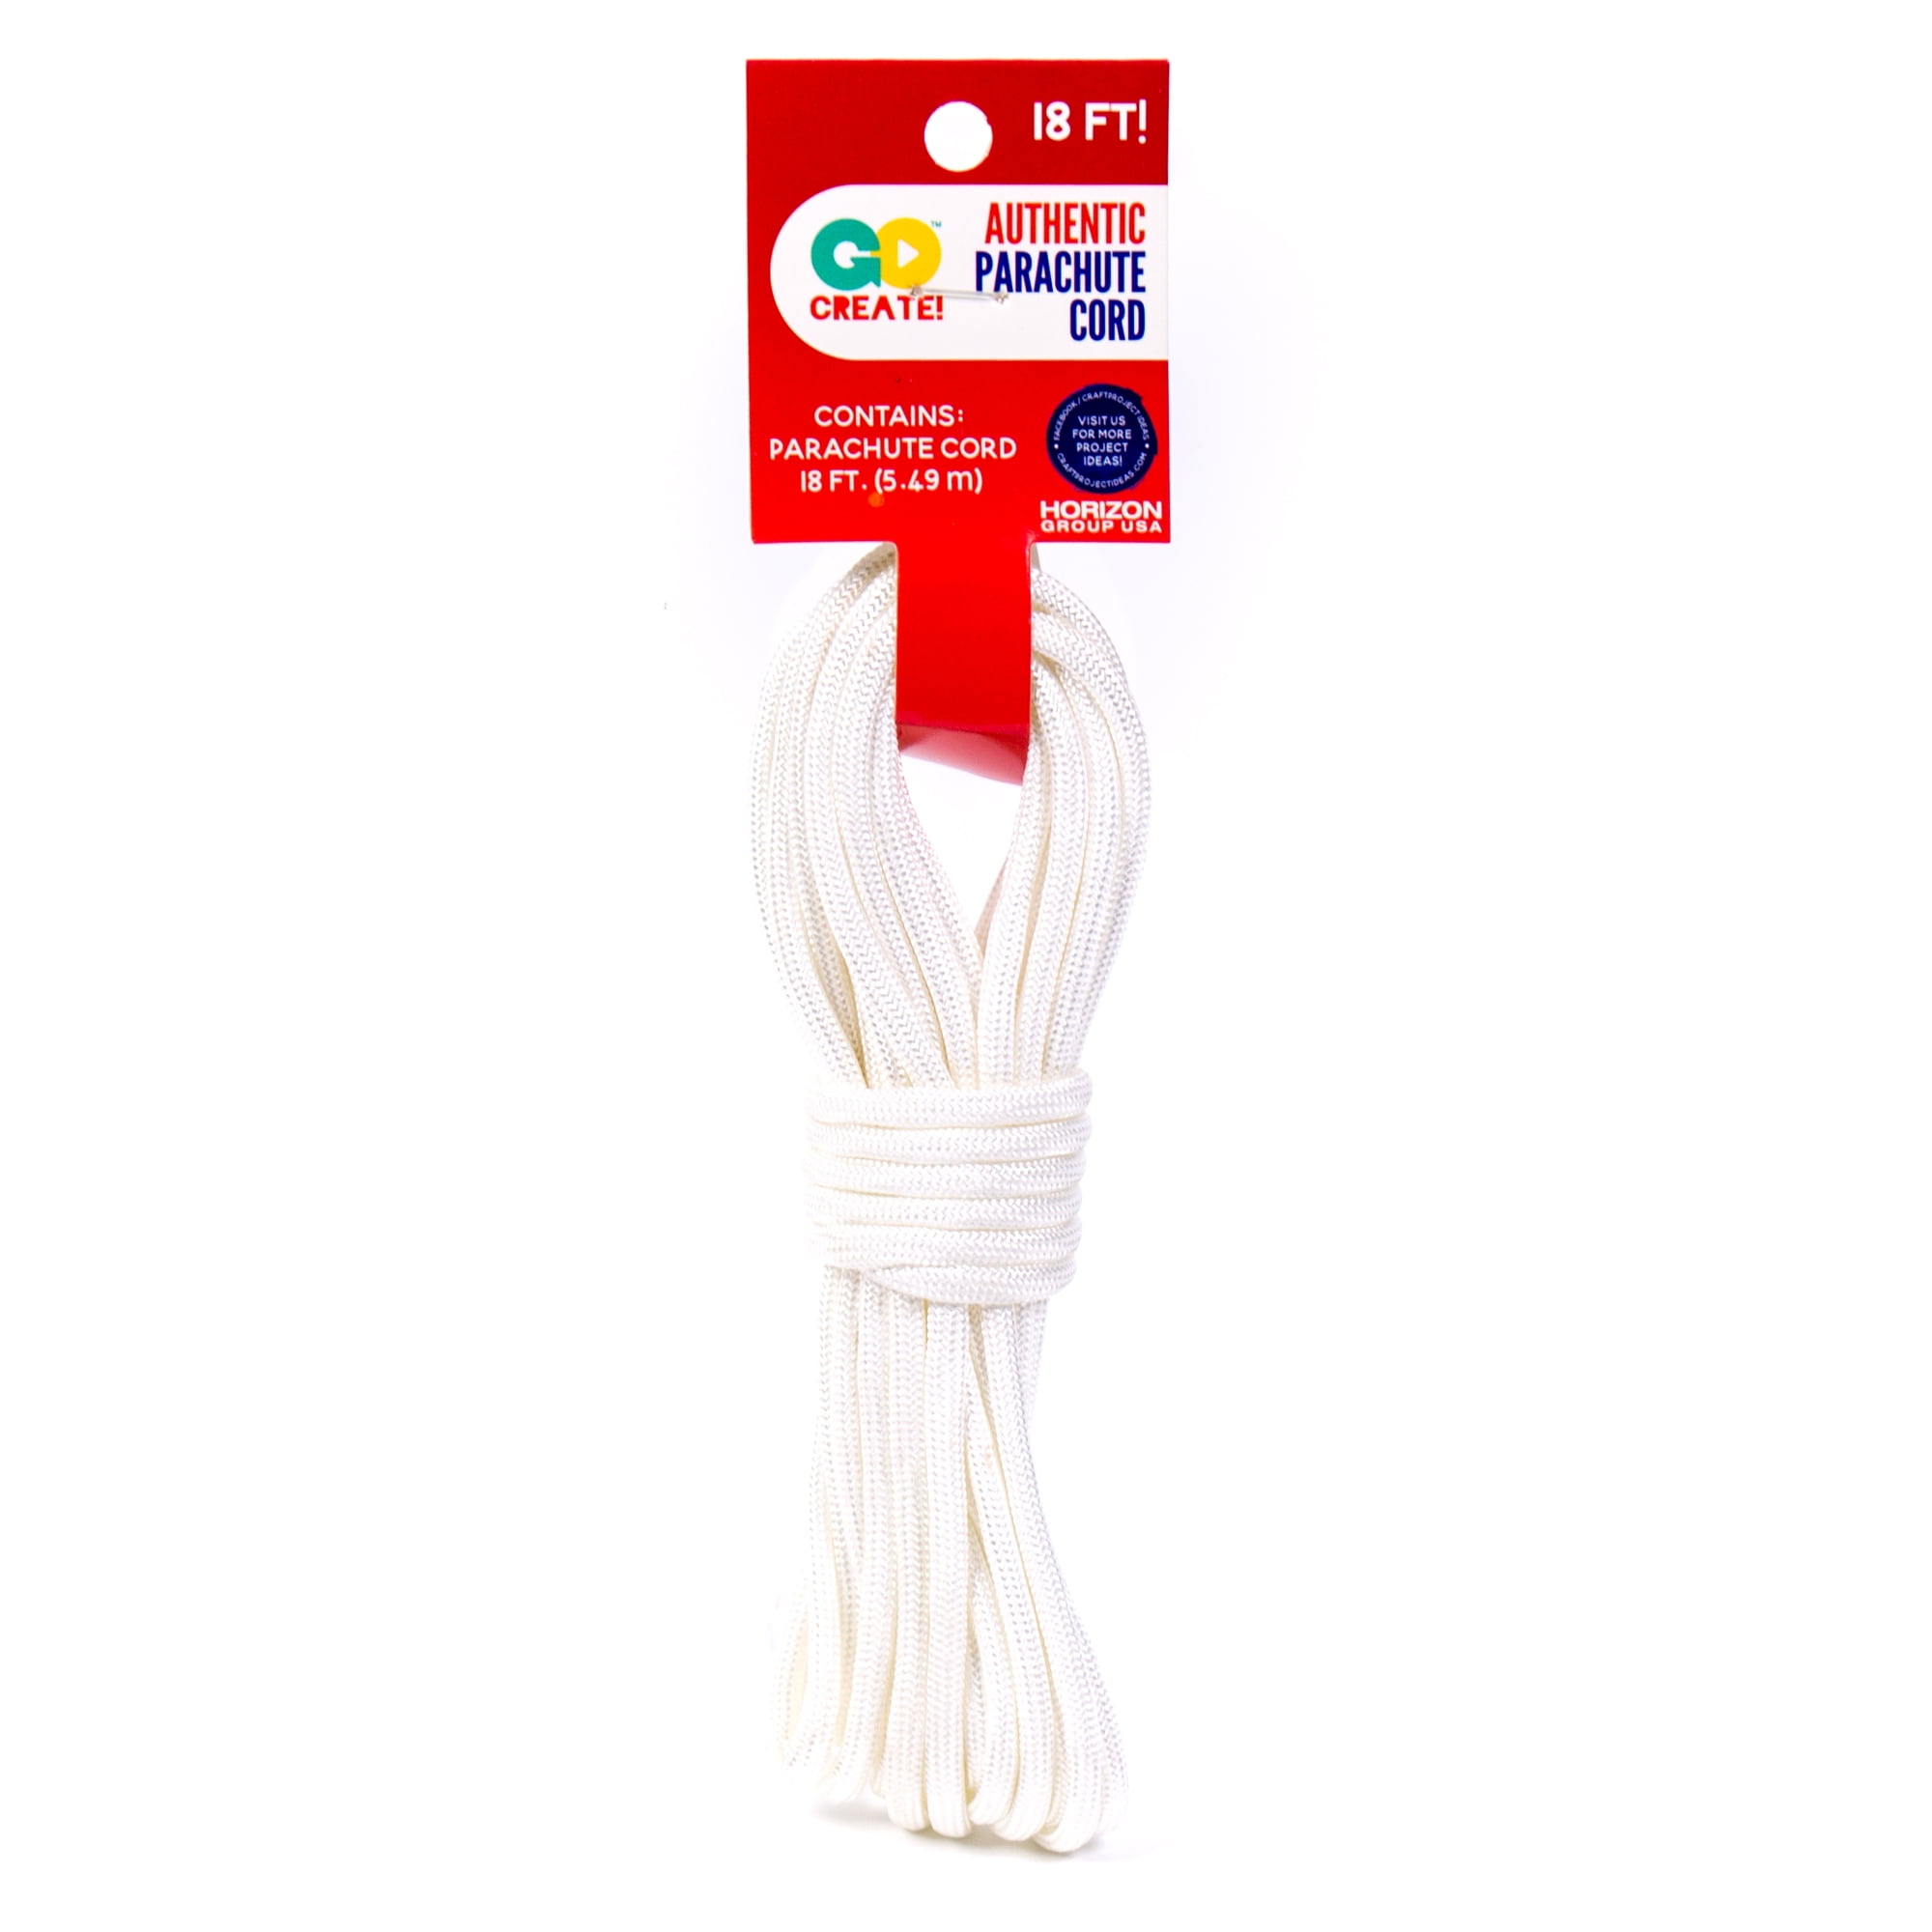 Go Create White Parachute Cord, 18 ft. Long, Ages 3 Years & Up